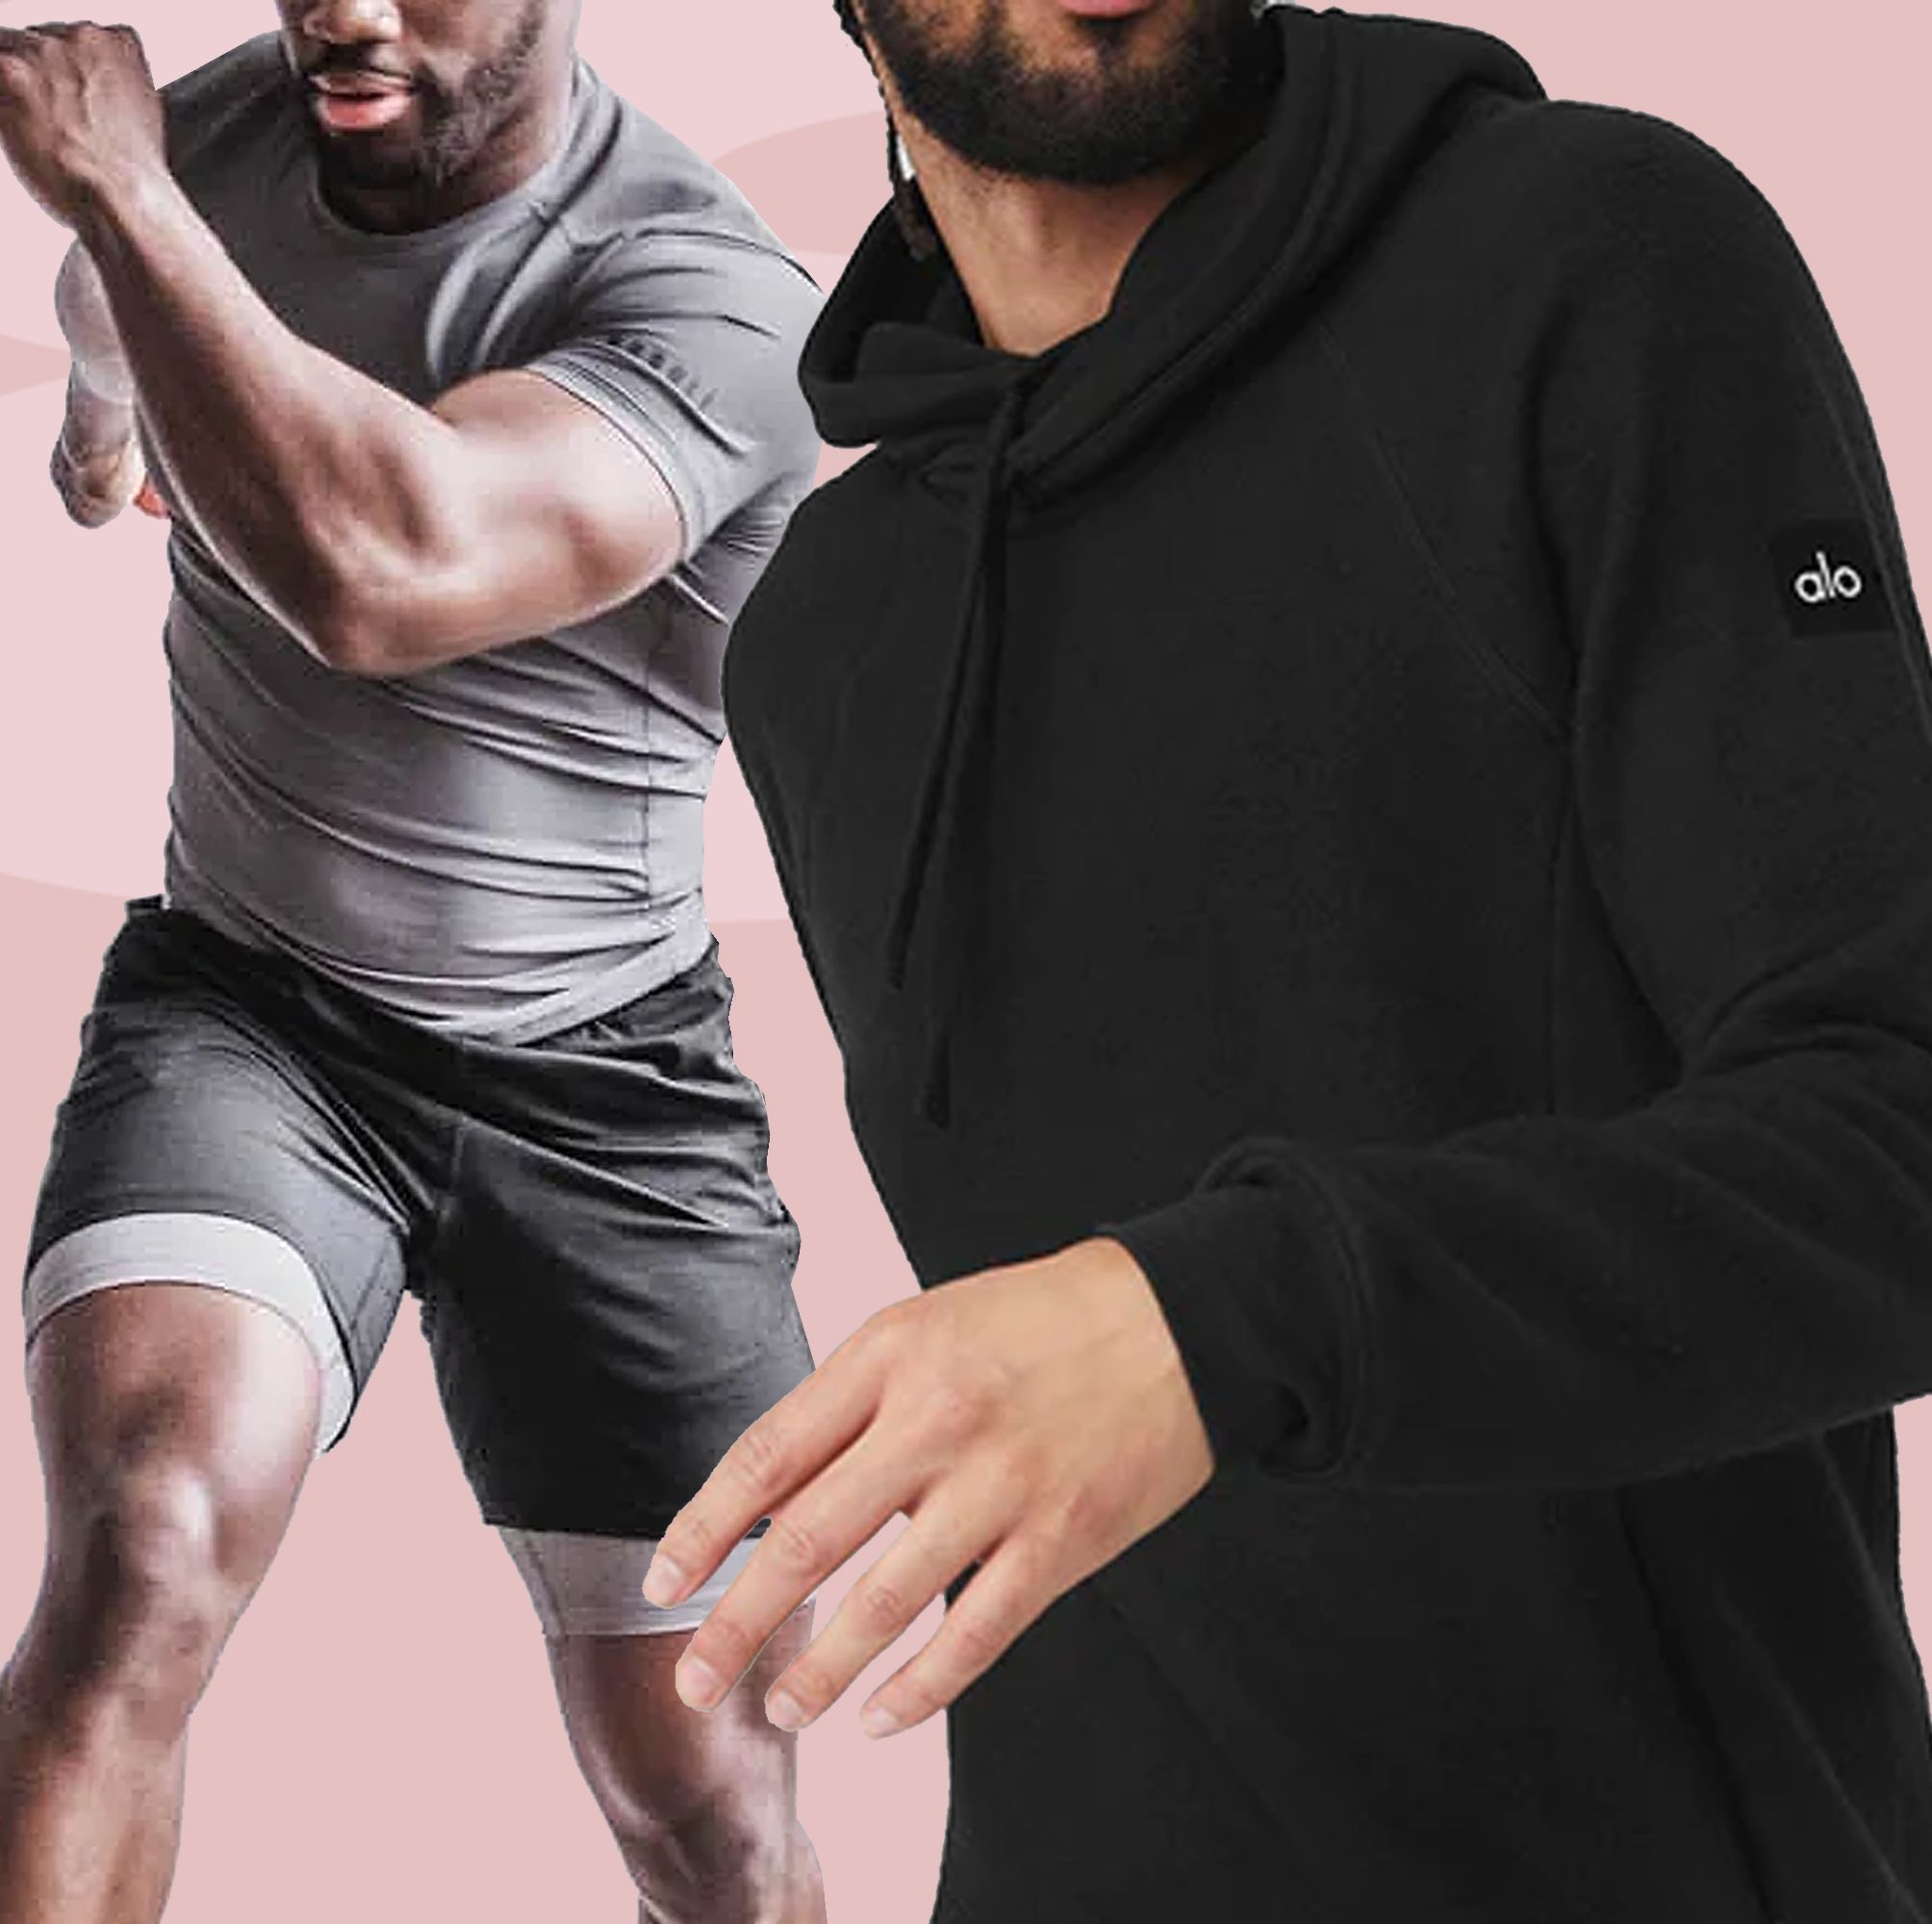 20 Clothing Brands Dominating the Fitness Space